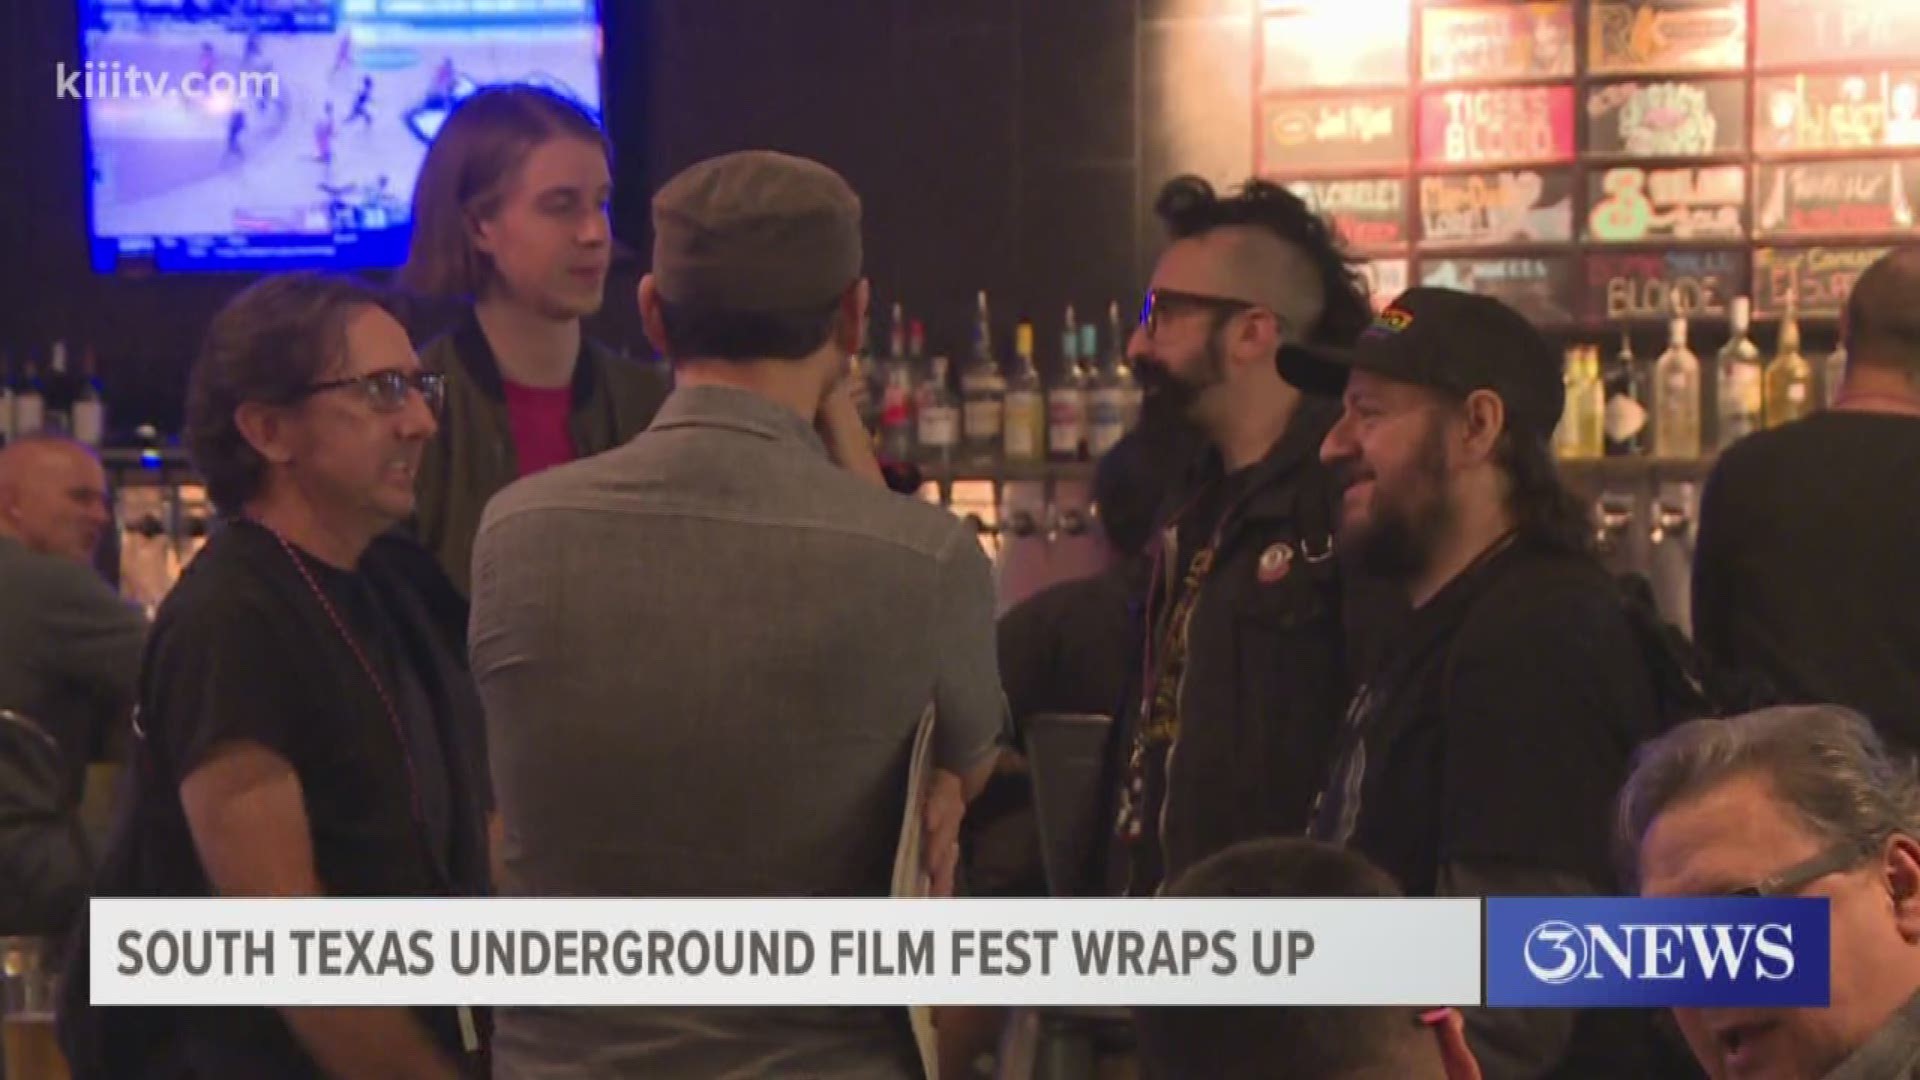 The festival allows local film makers to showcase their talent, creativity and also help them network to create new projects with fellow artists.